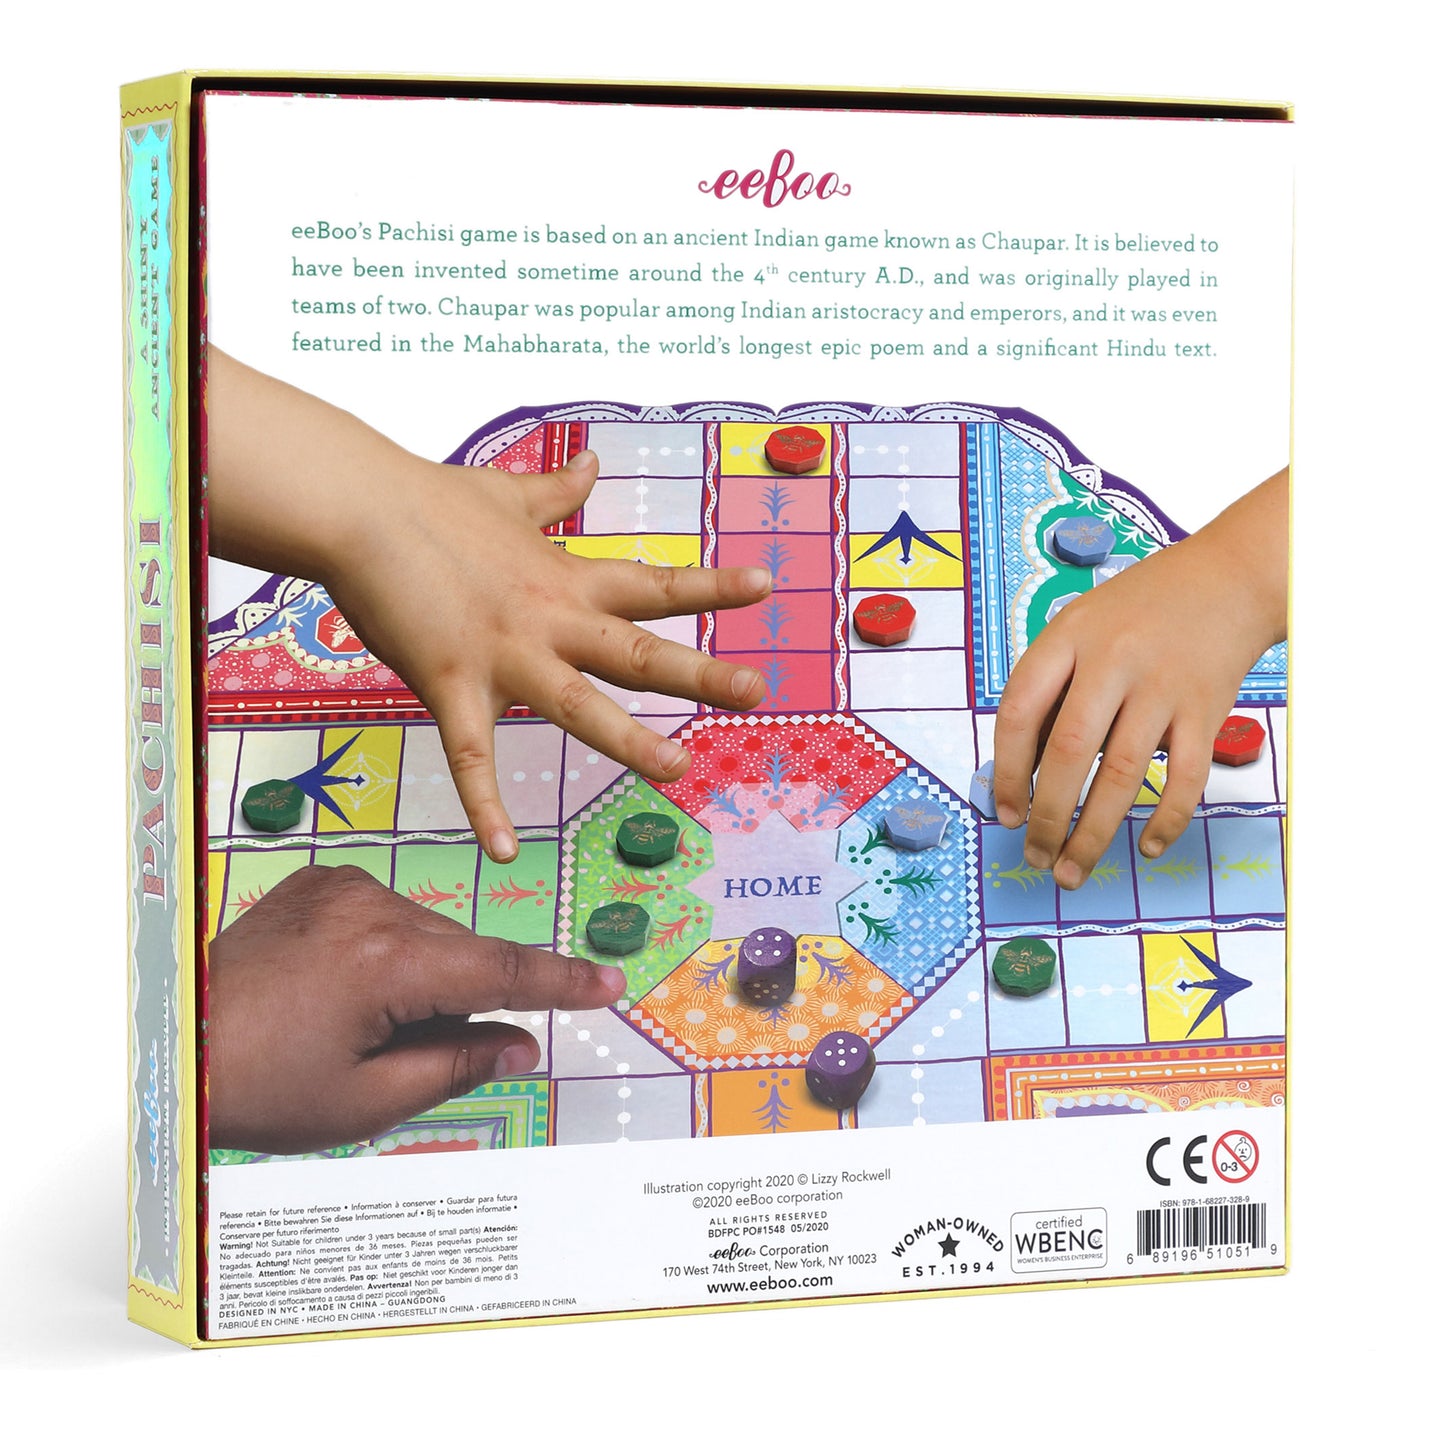 Fancy Pachisi Parcheesi Sorry Classic Family Board Game eeBoo for Kids Ages 5+